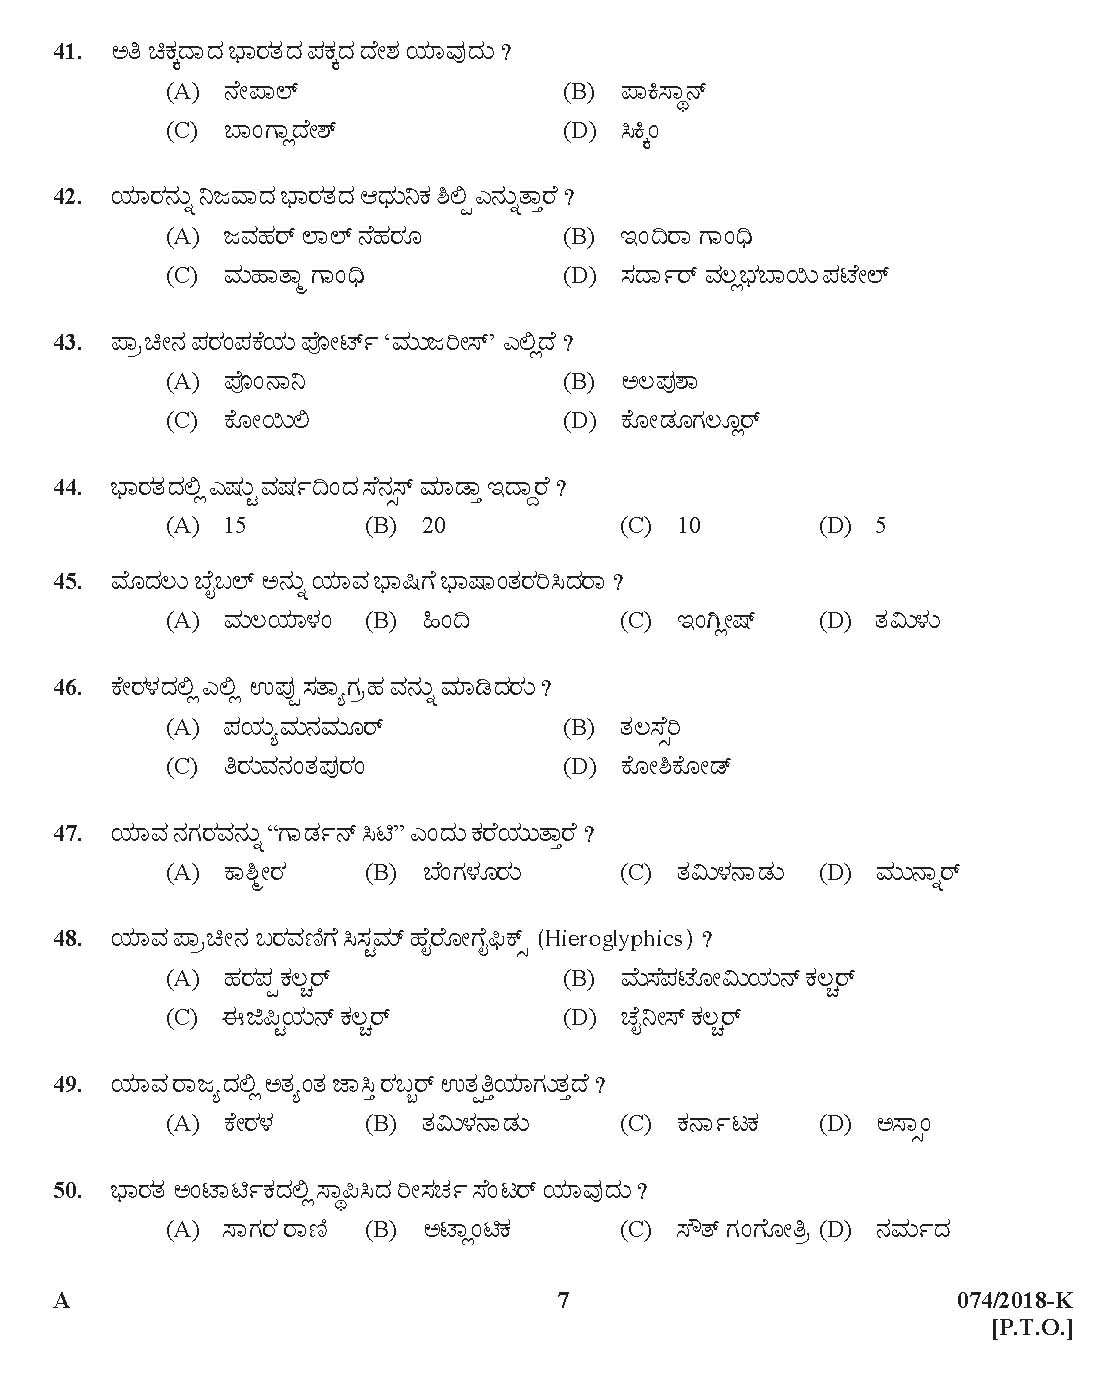 Kerala PSC Police Constable Driver Exam Question Paper Code 0742018 K 6